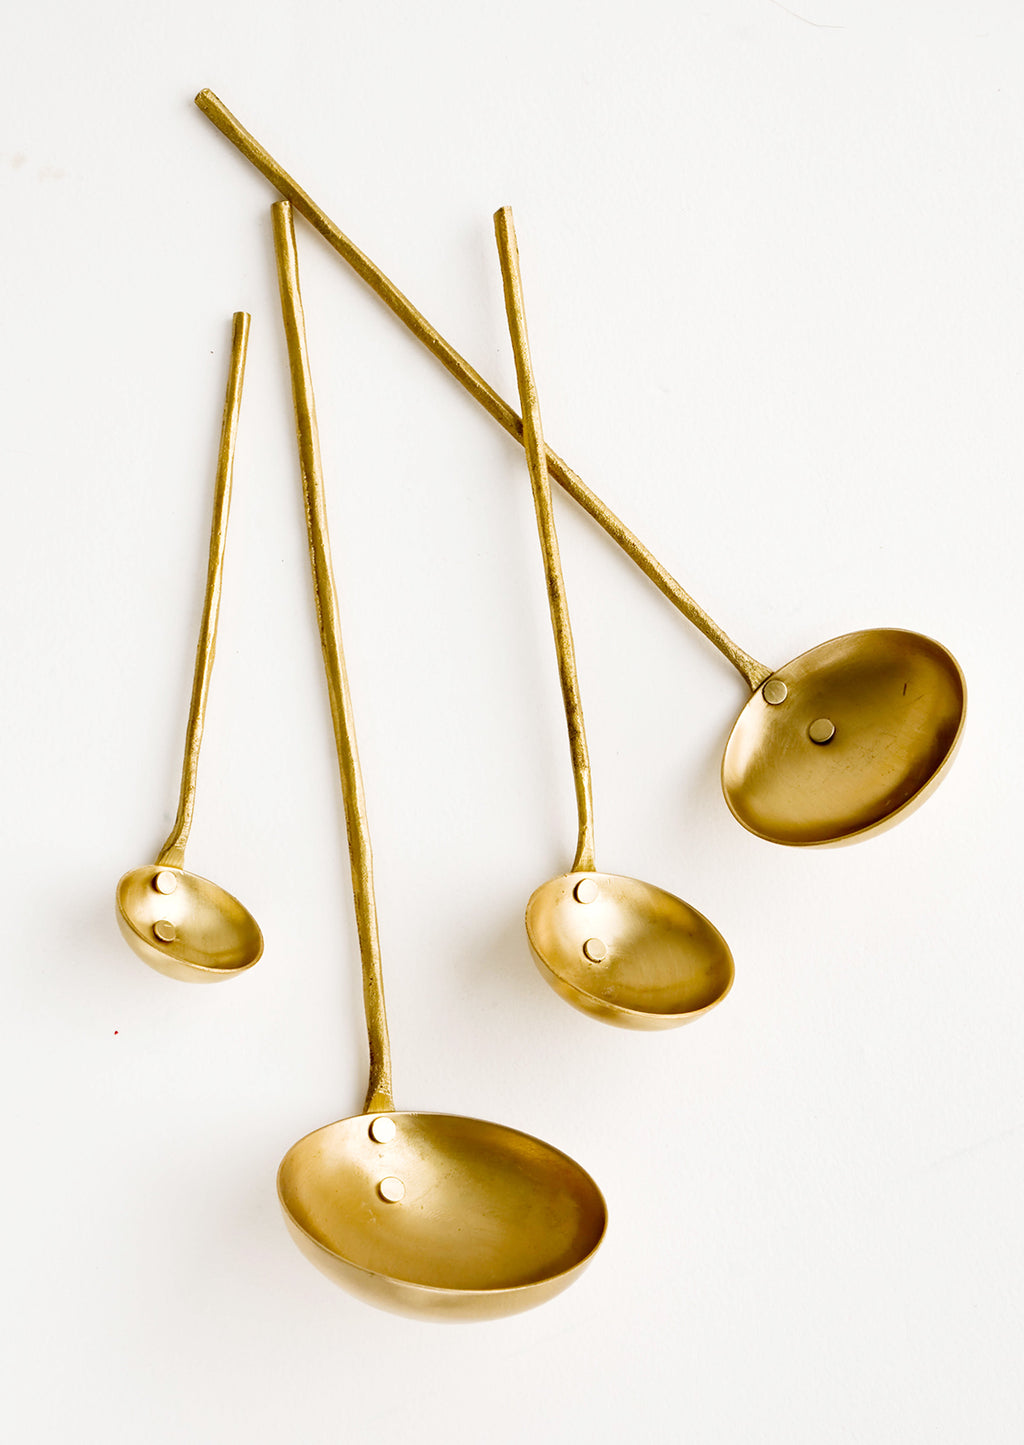 3: A set of four ladles in incremental sizes from extra small to large, crafted in solid brass with skinny, rough textured handles